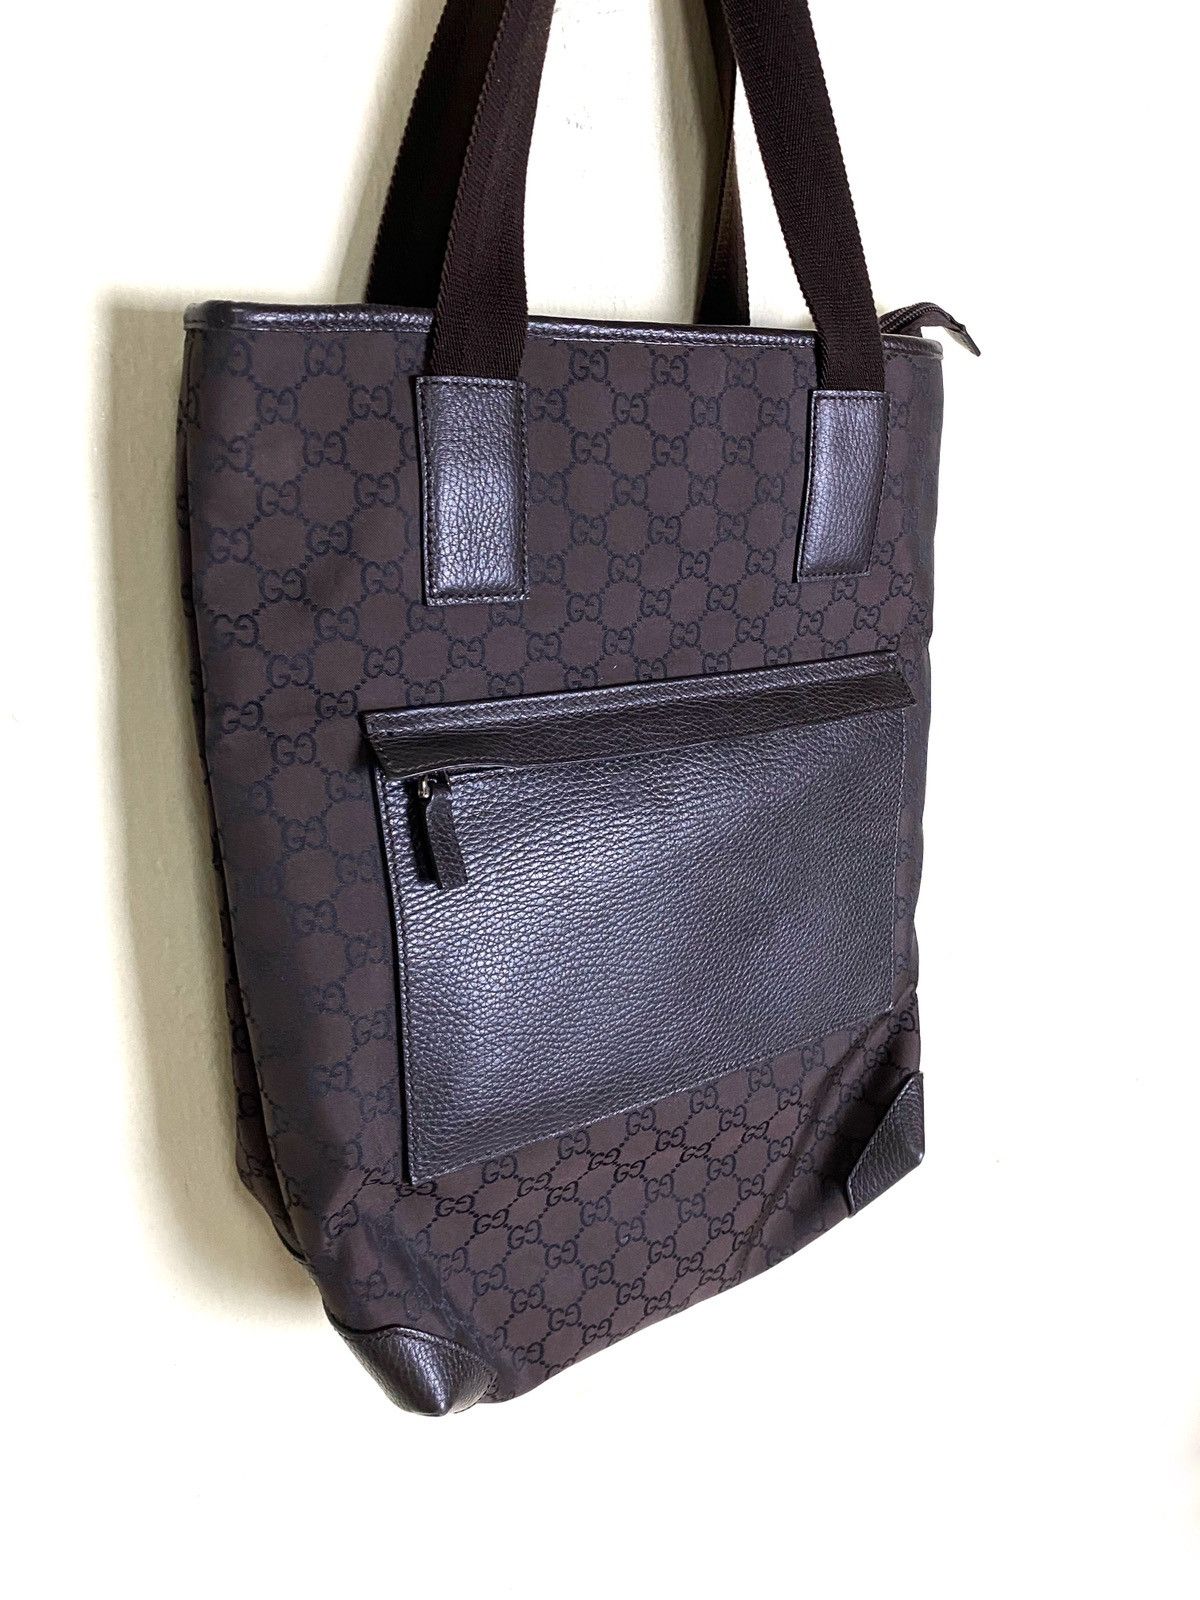 Authentic GUCCI Monogram Tall Tote Bag - 2